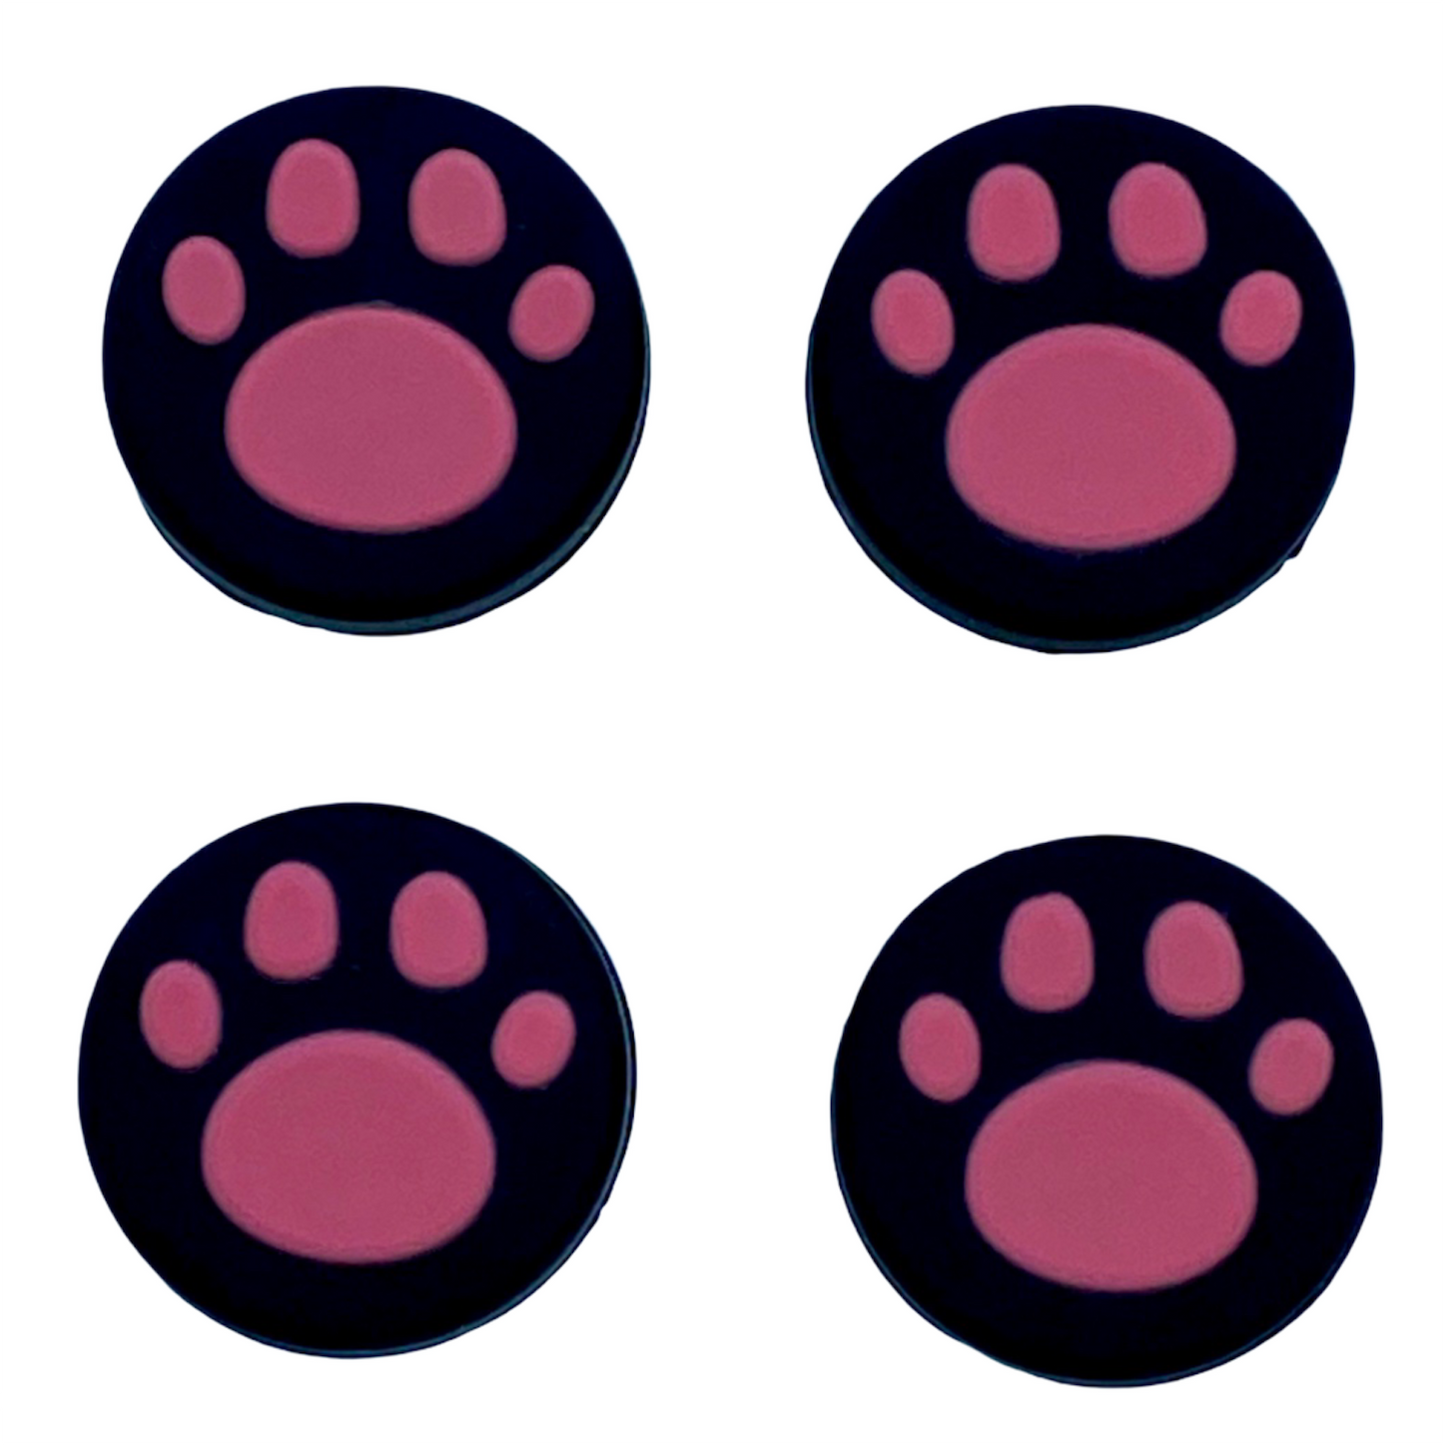 JenDore Pink & Black 4Pcs Paw Silicone Thumb Grip Caps for Nintendo Switch